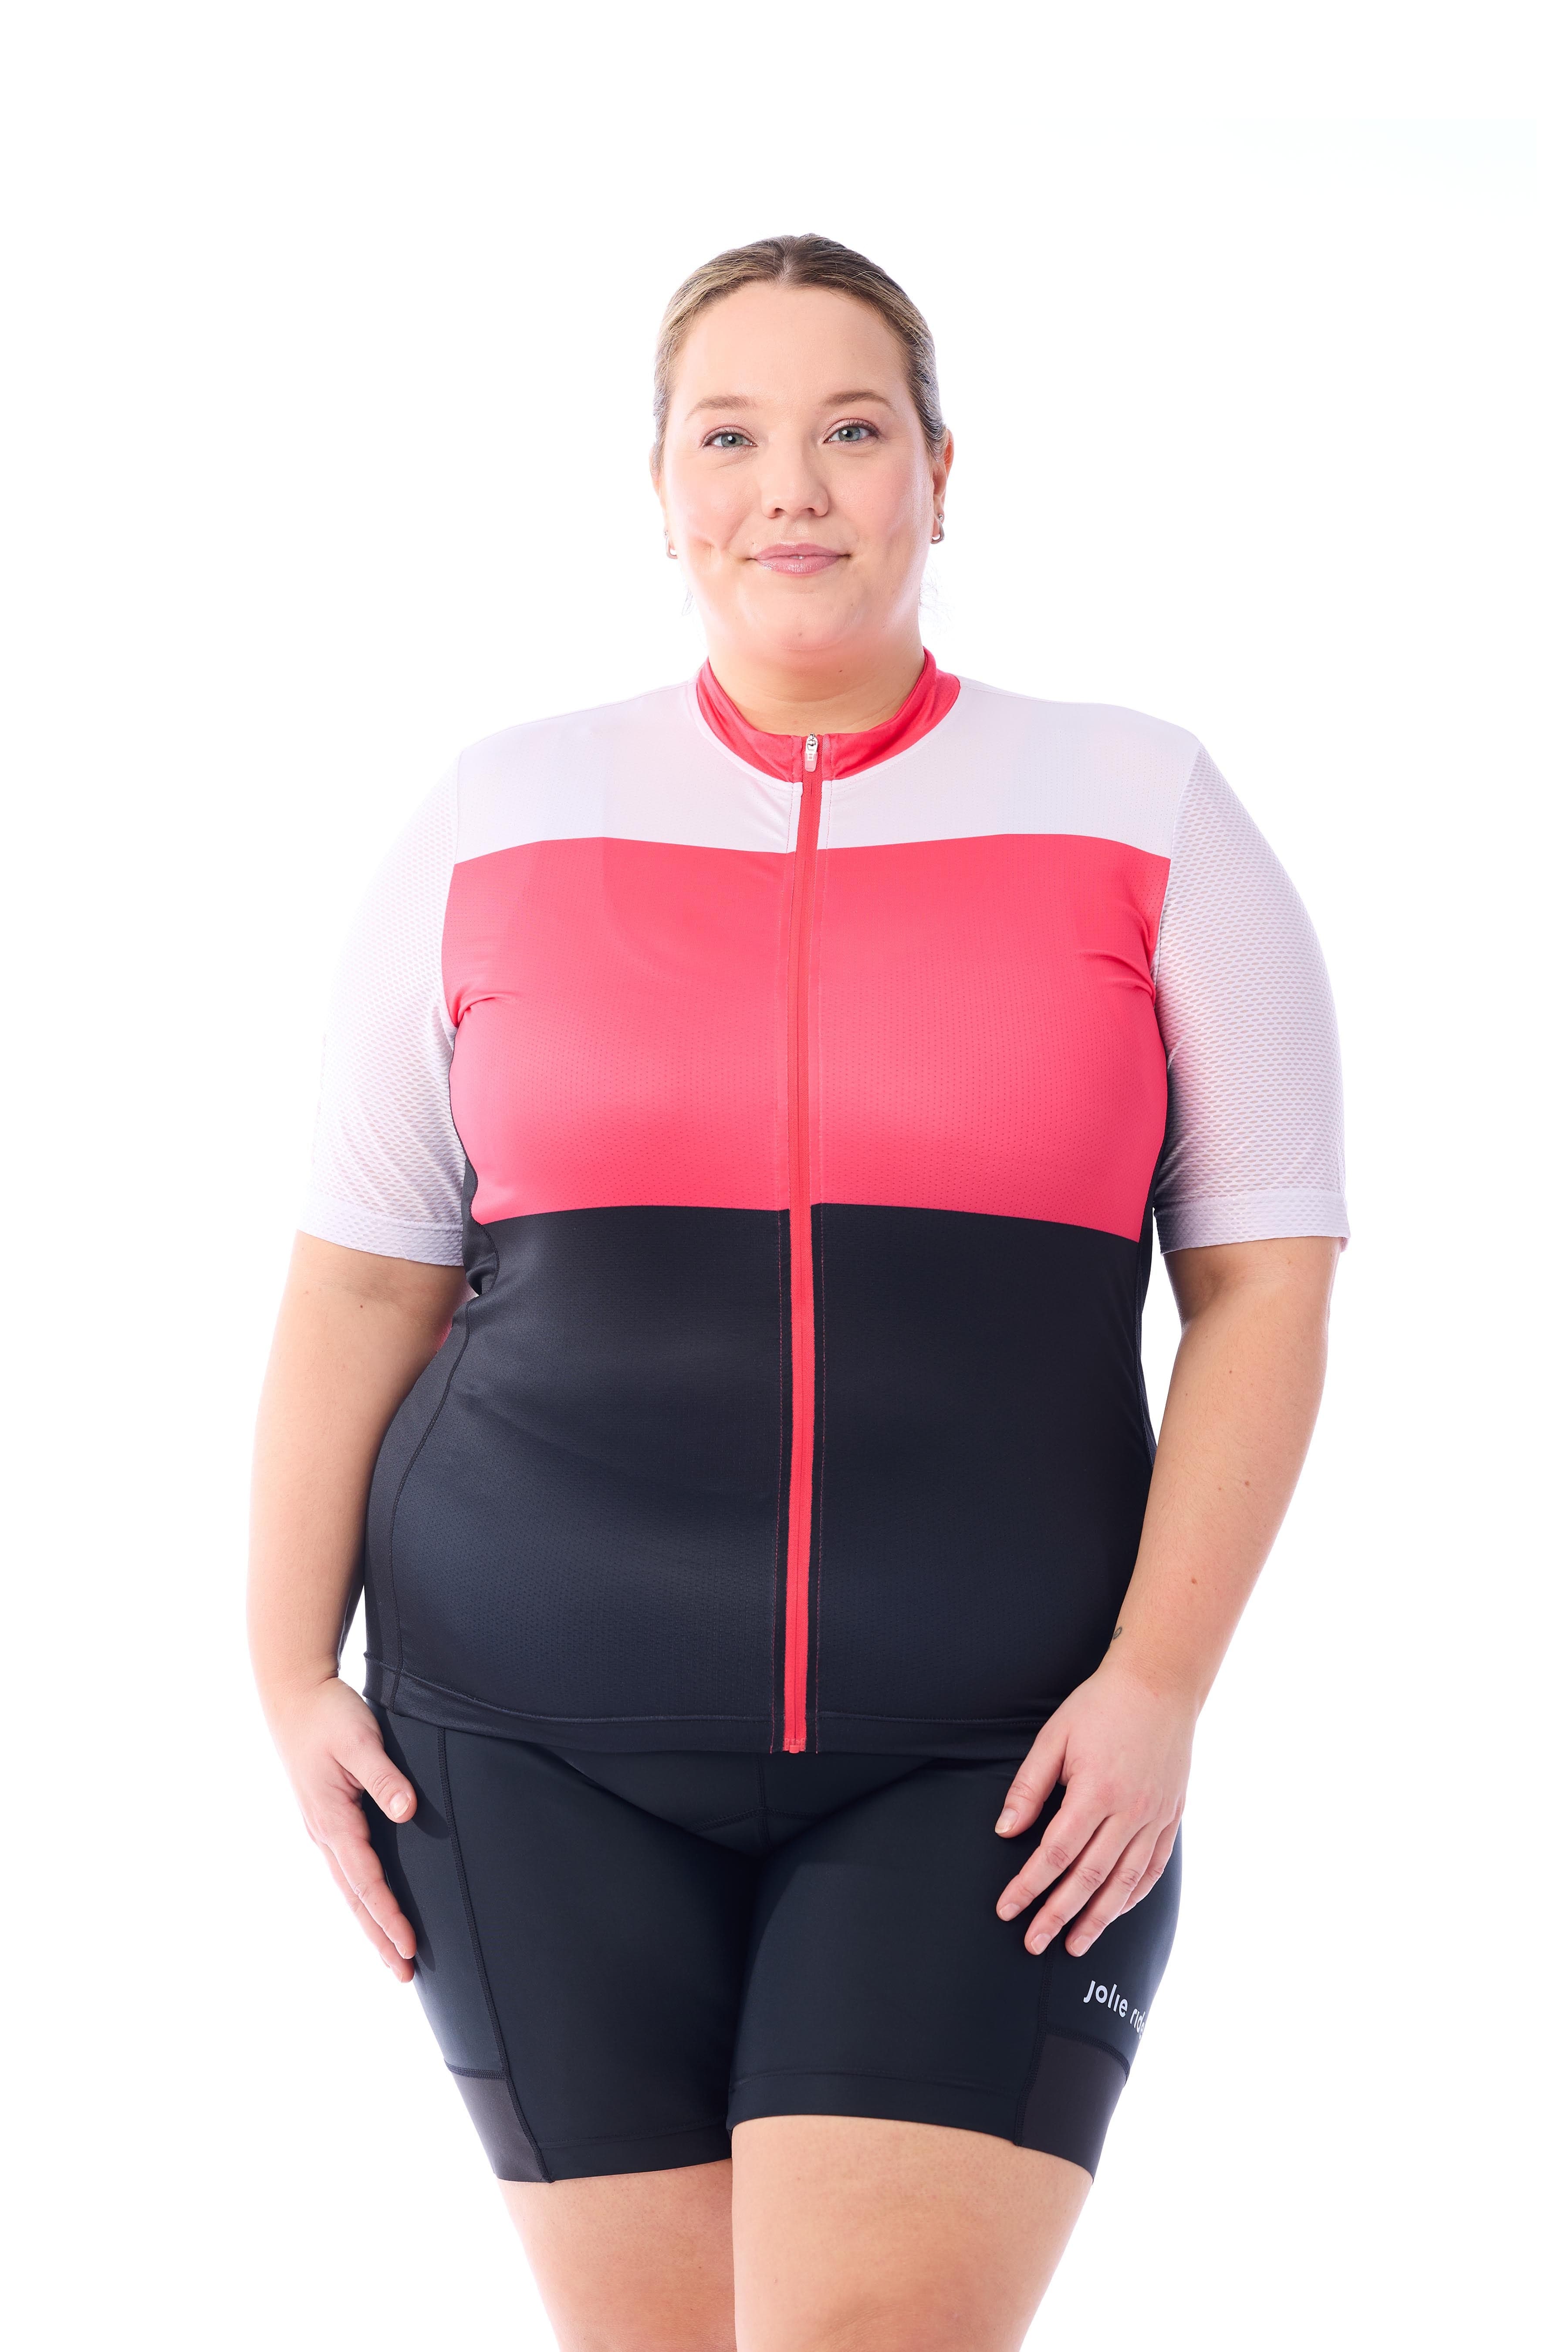 JolieRide Jersey Black Neon Pink / 1X women's colorblock cycling jersey with UV protection, breathability, and storage